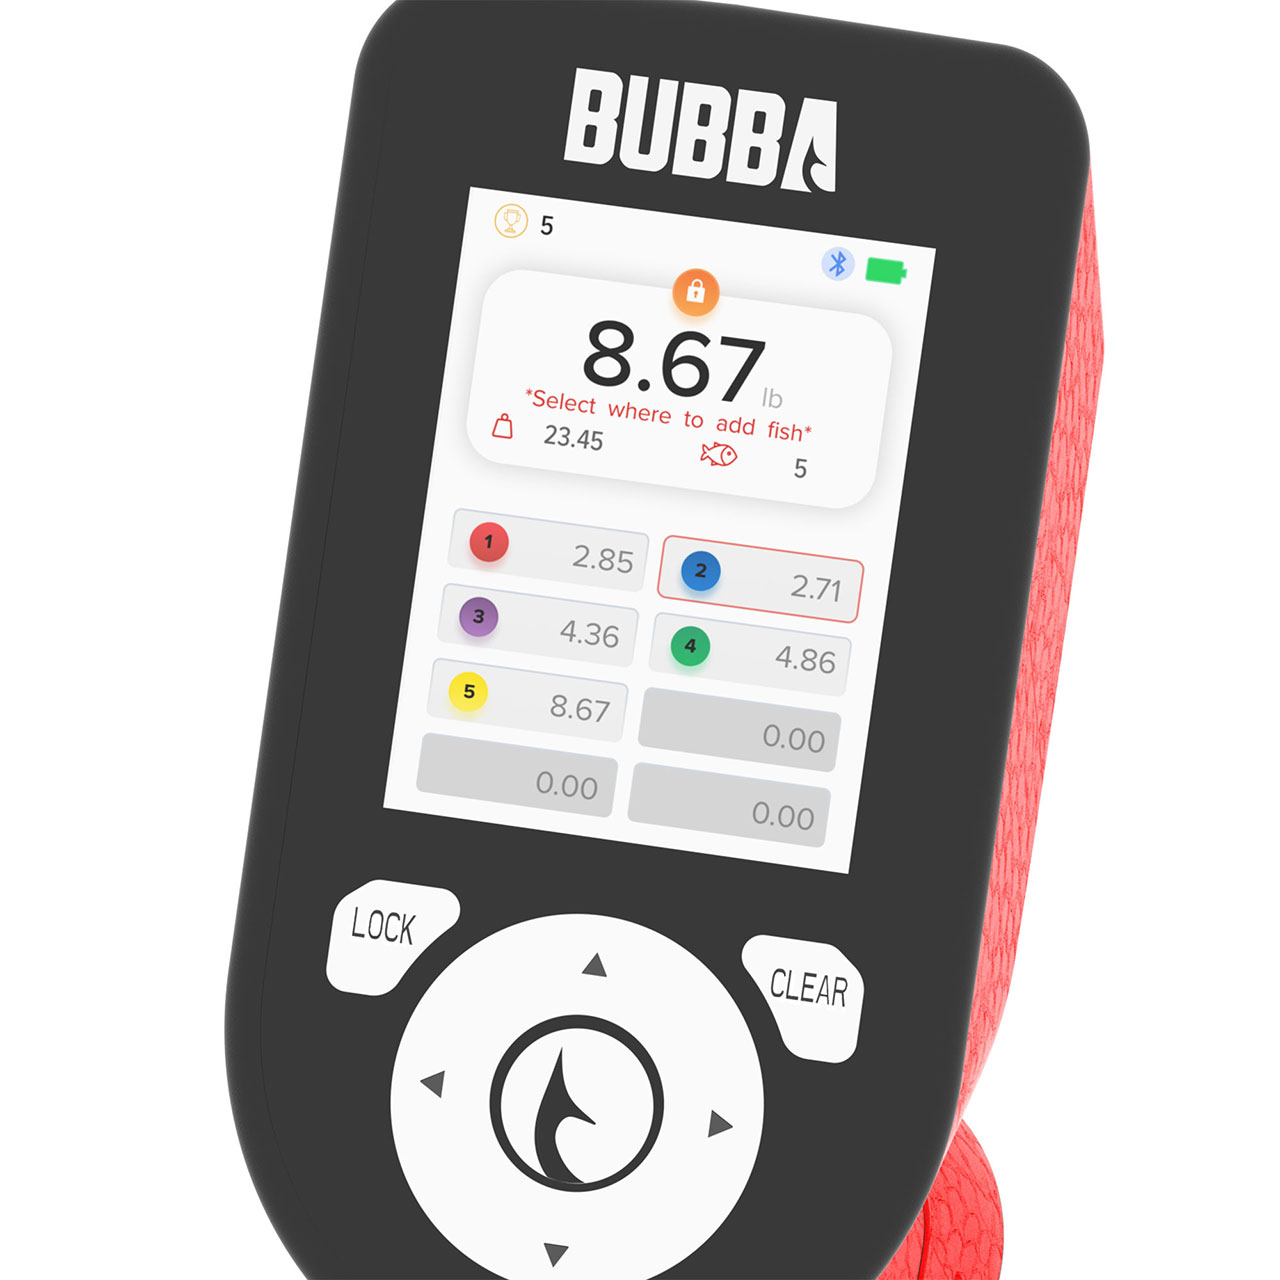 BUBBA Pro Series Smart Fish Scale Wins ICAST <em>Best of Category</em>